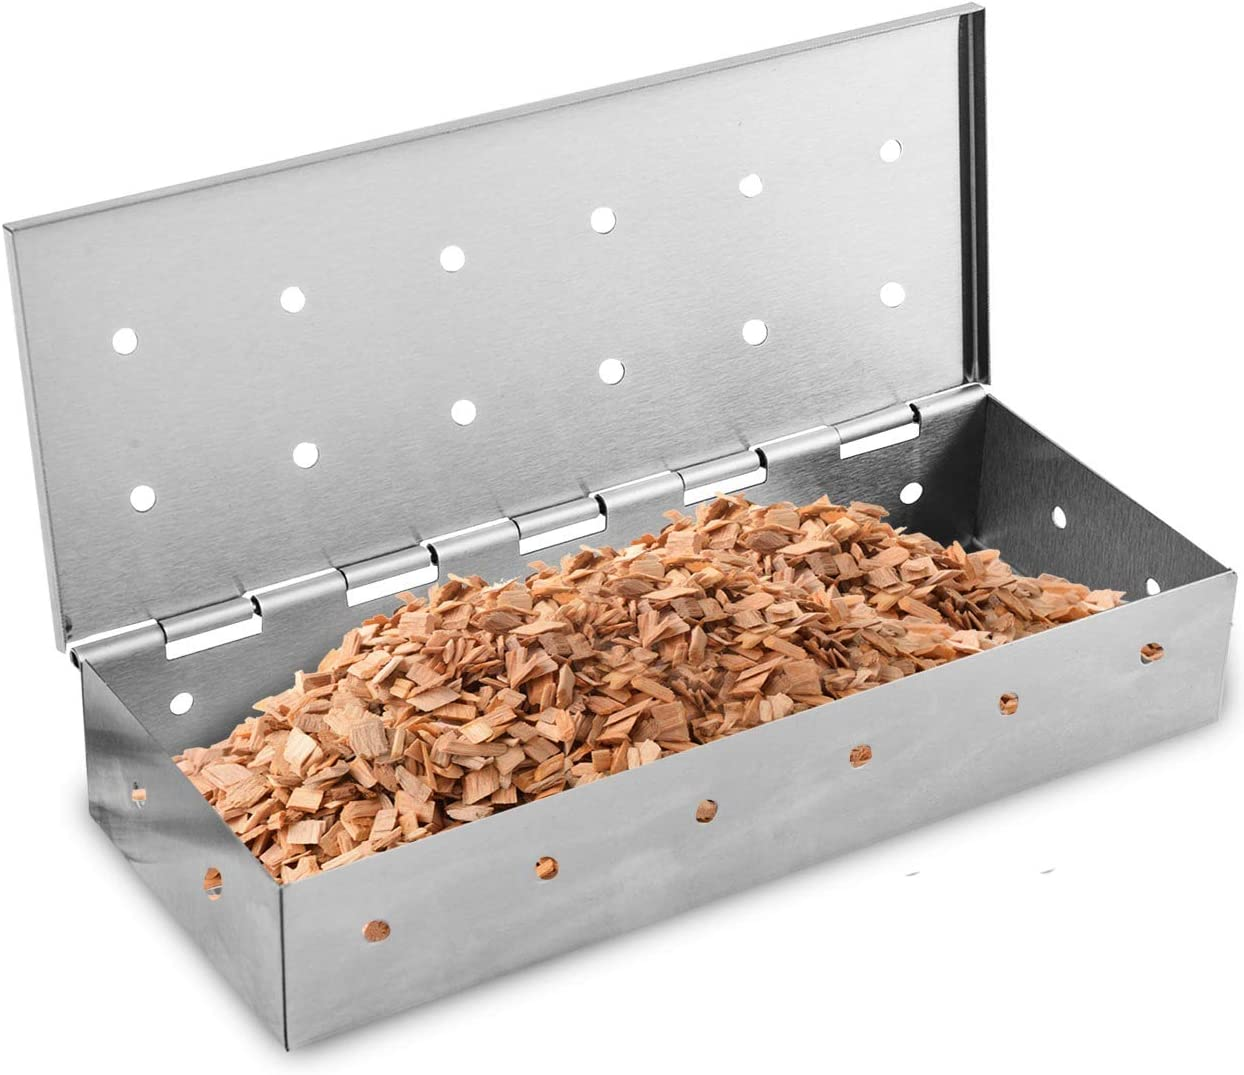 Smoker Box For Gas Grill or Charcoal Grill, Add Smoked BBQ Flavor-YAOAWE